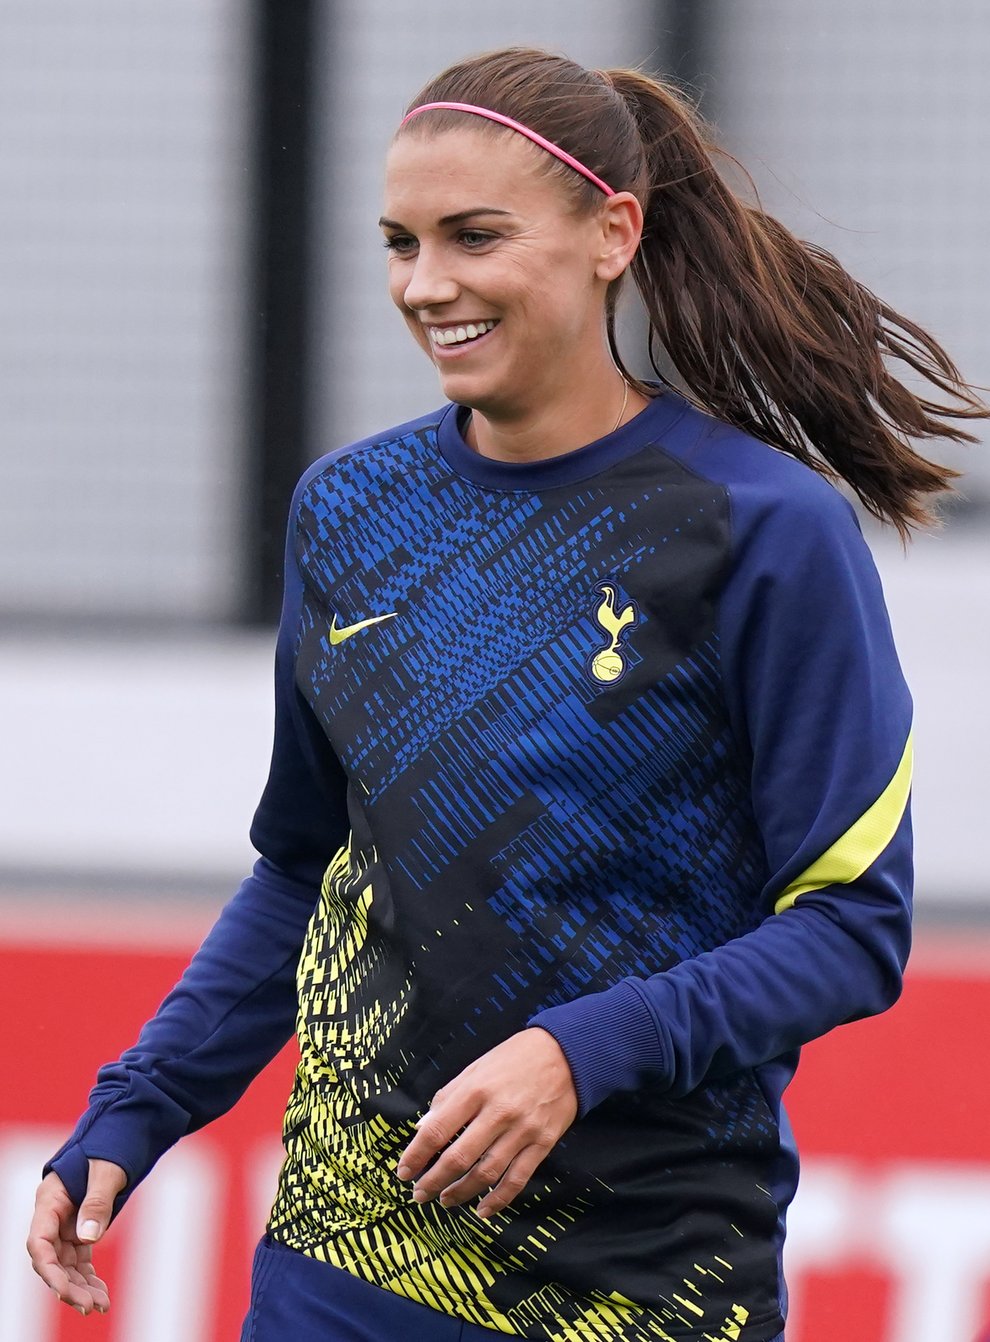 Alex Morgan believes joining Tottenham is a "great opportunity" for her following her move from the United States